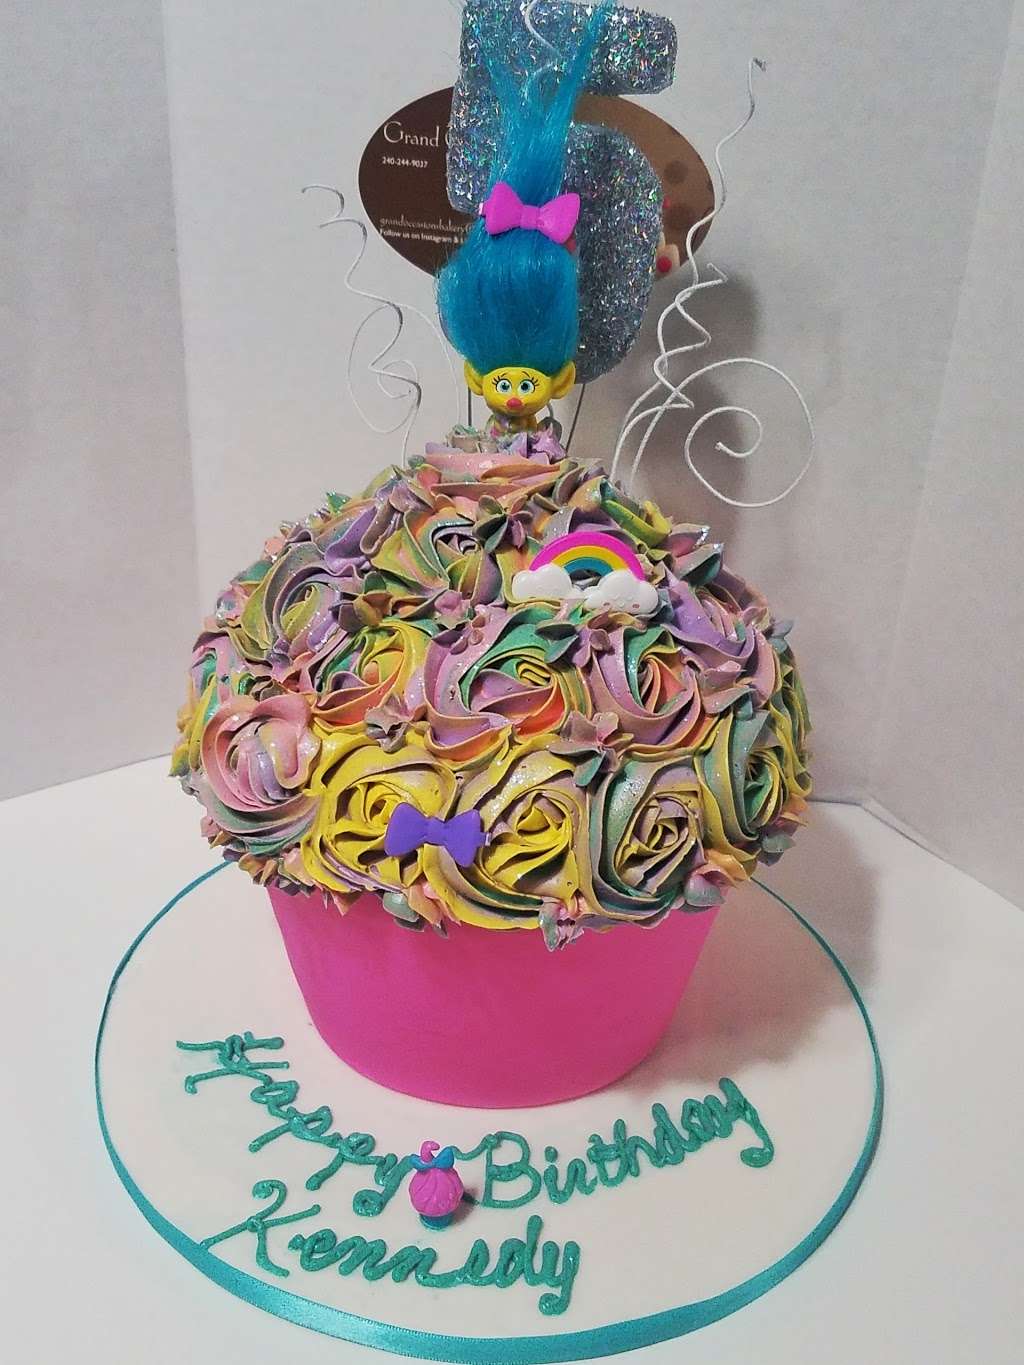 Grand Occasions Bakery | 857 Lacewood Terrace, Landover, MD 20785, USA | Phone: (240) 244-9037